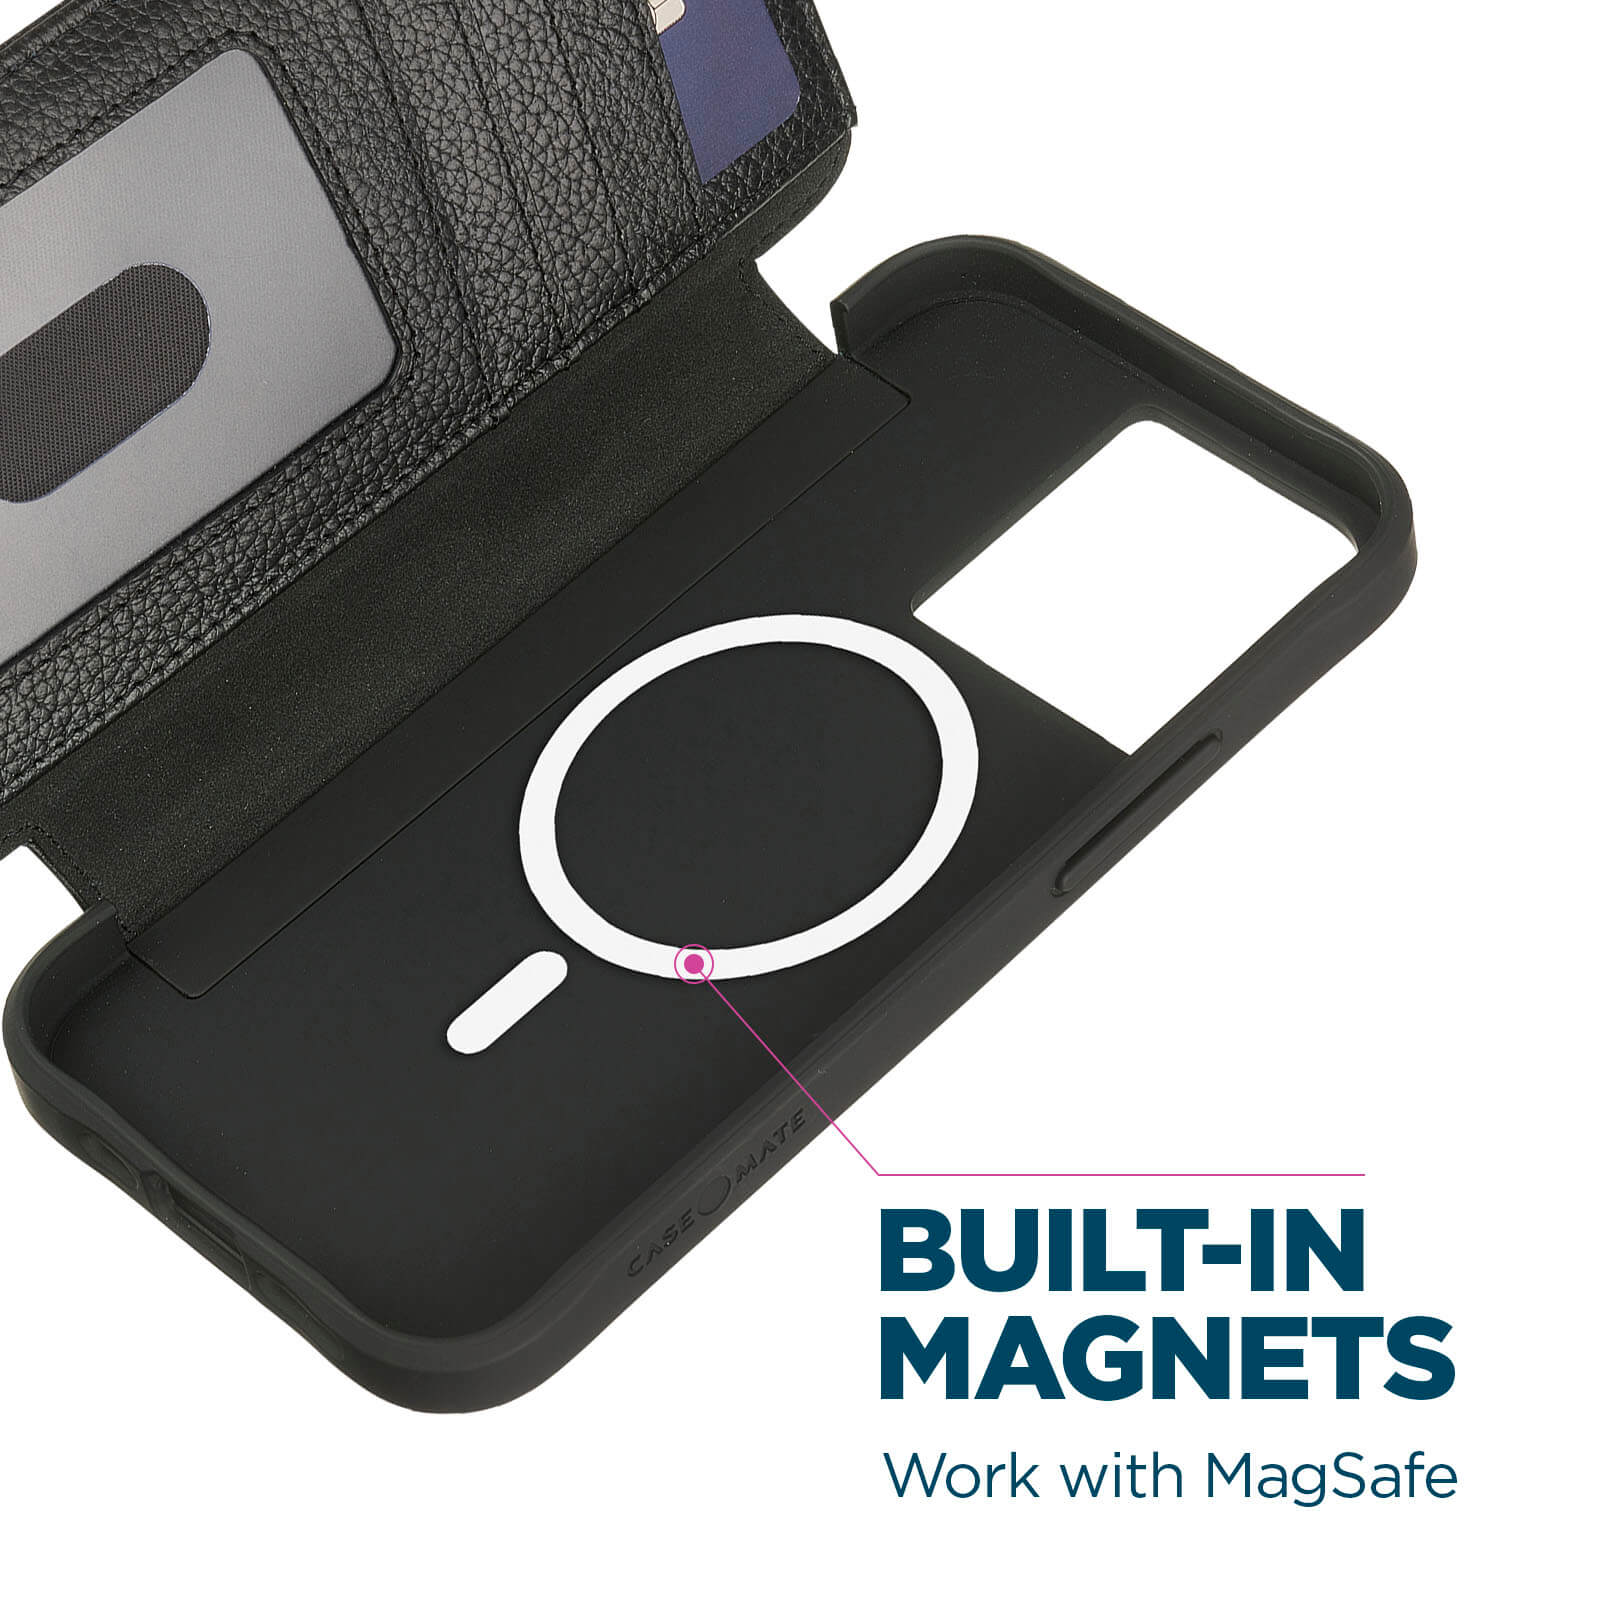 Built-in magnets work with MagSafe. color::Black